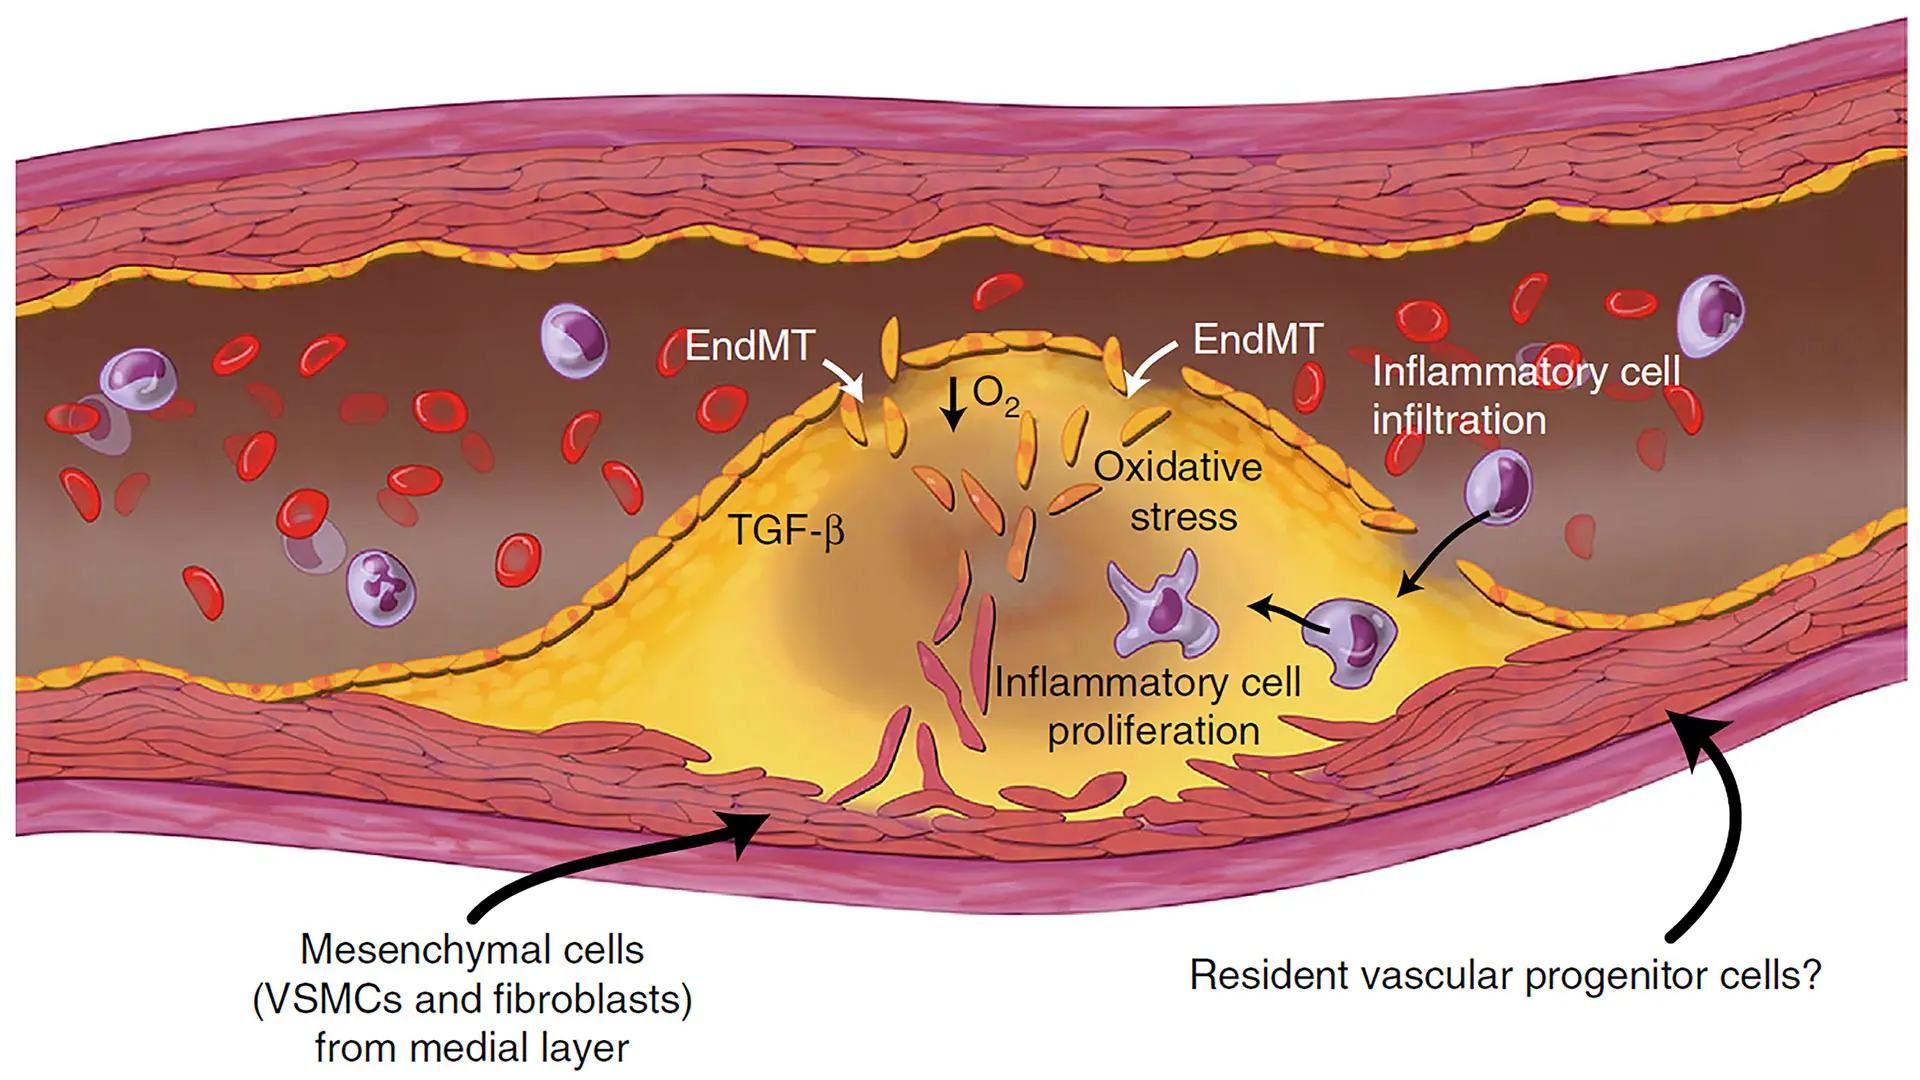 A schematic illustration of the cellular contributions to atherosclerotic plaques, where EndMT (endothelial to mesenchymal transition) plays a key role. (From a related 2016 paper, "Endothelial to mesenchymal transition is common in atherosclerotic lesions and is associated with plaque instability" in Nature Communications.)